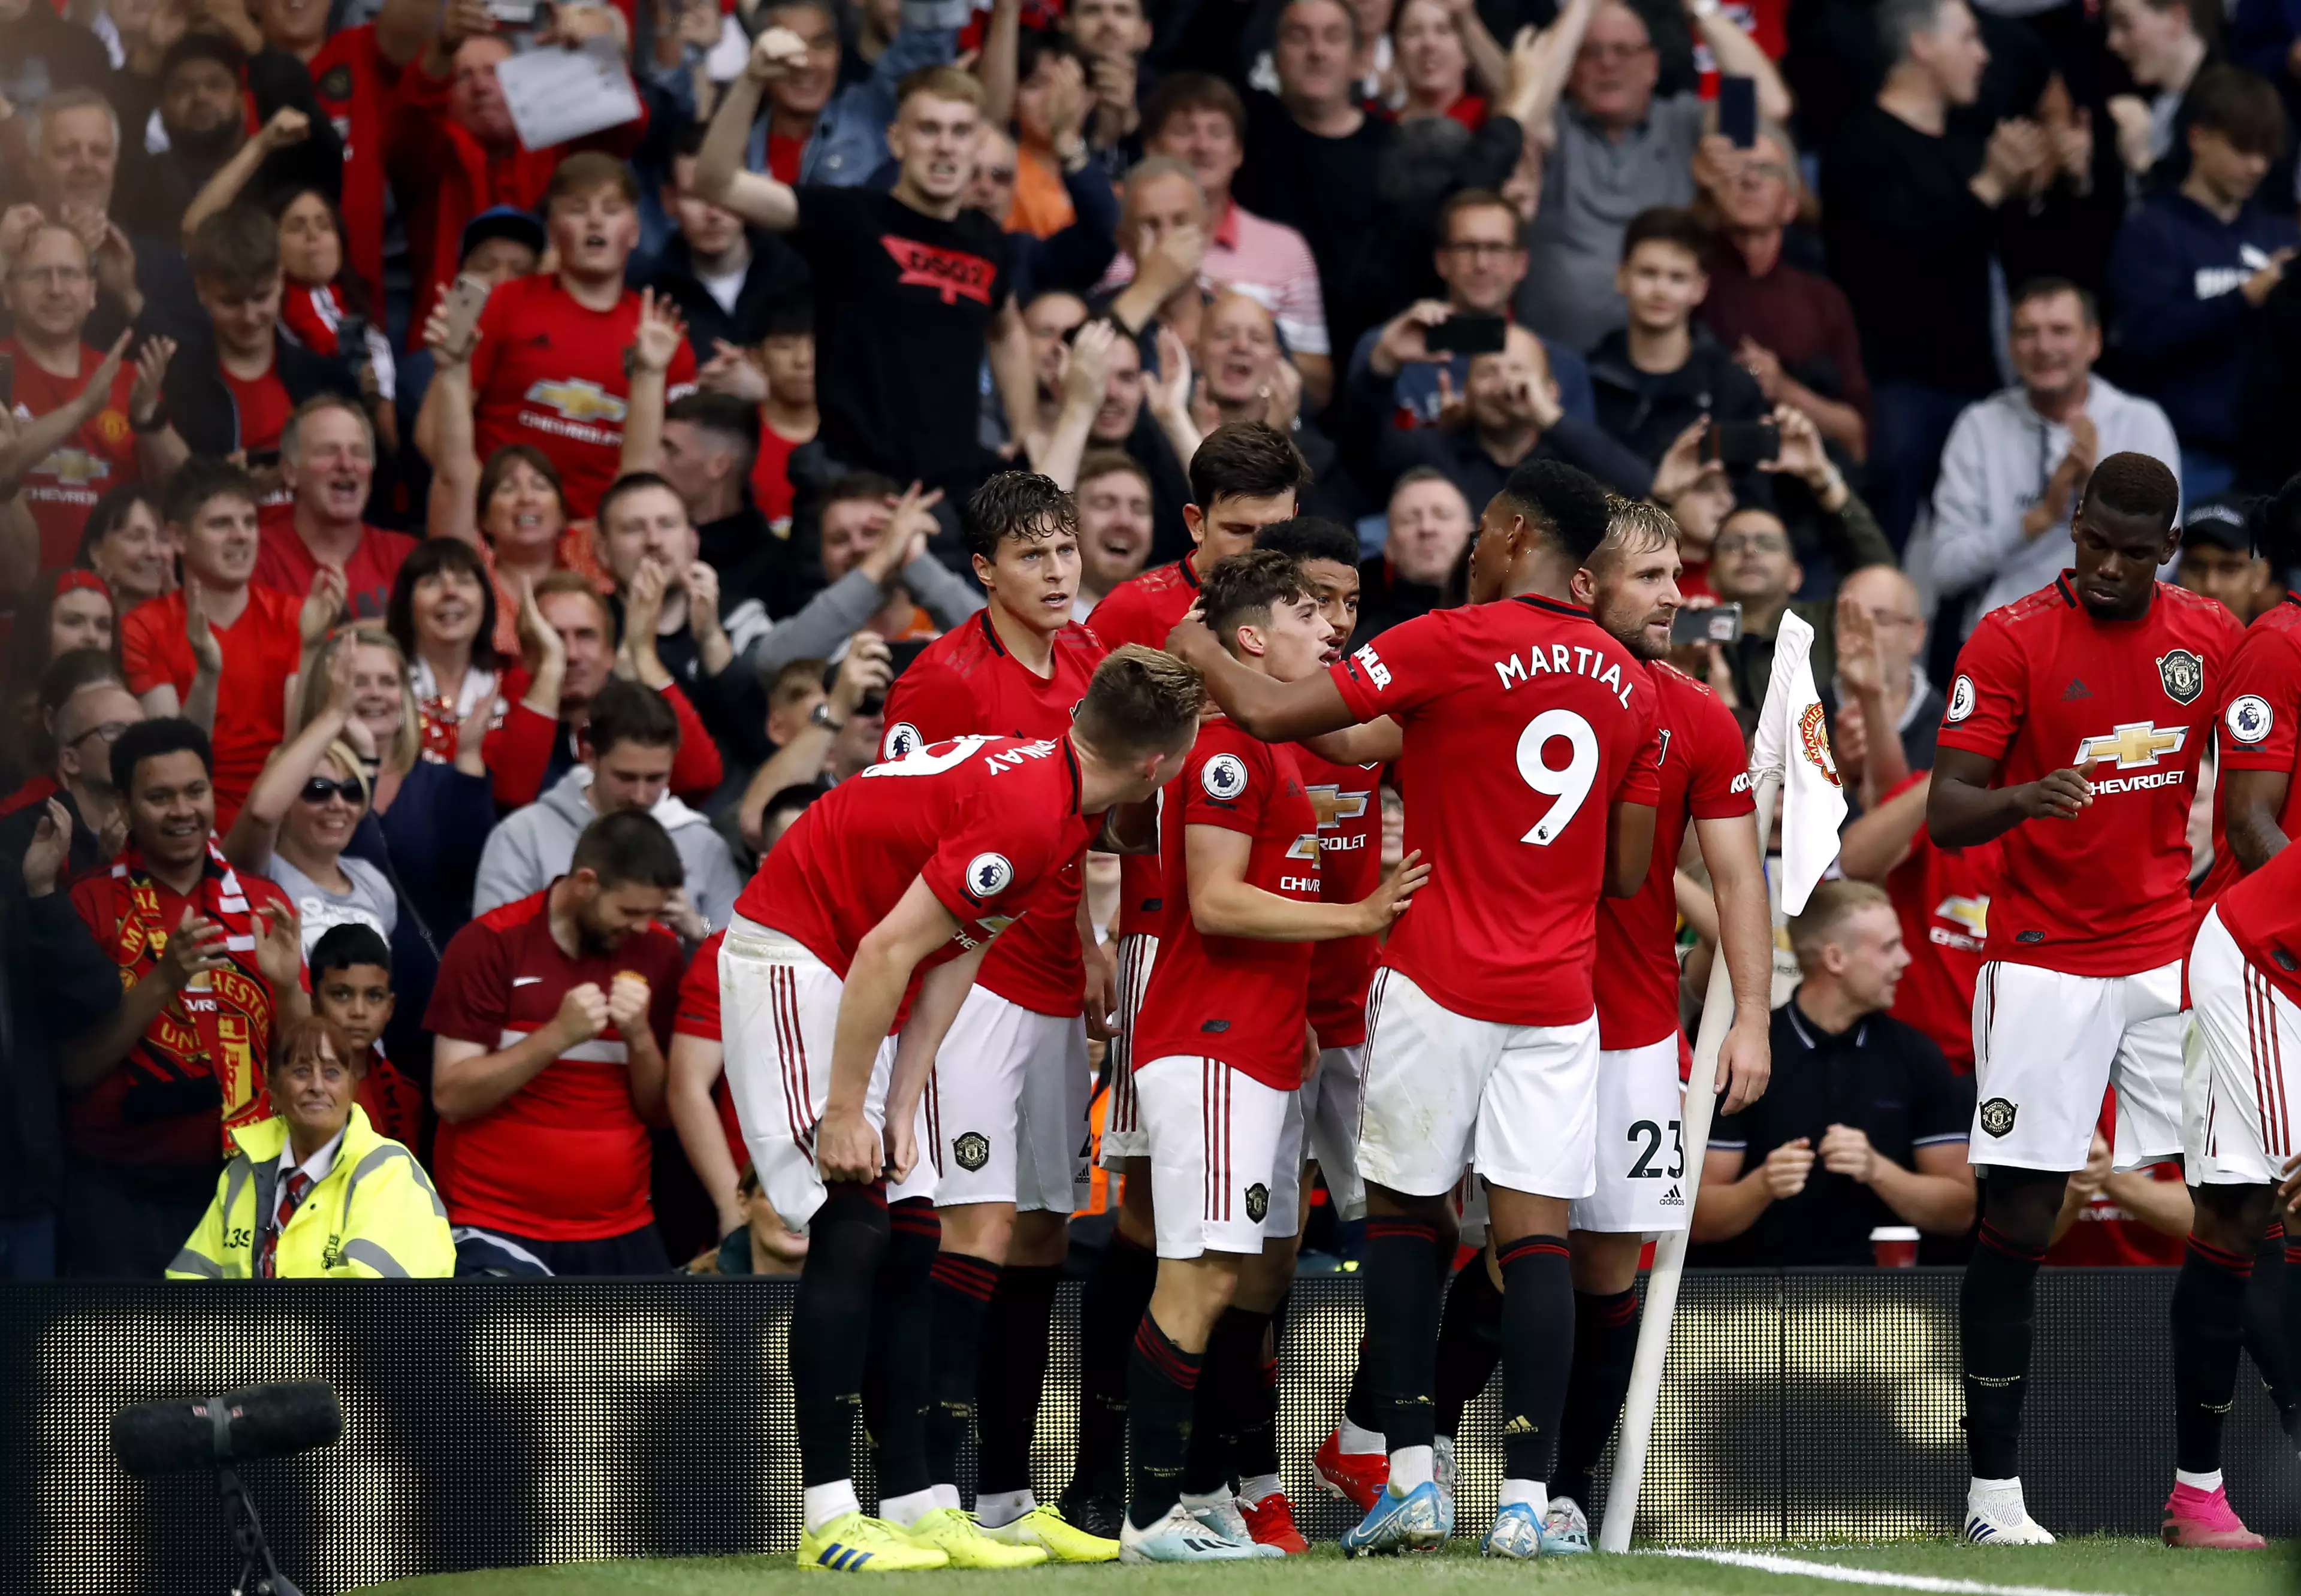 Manchester United celebrate Daniel James' strike which put them 4-0 up against Chelsea